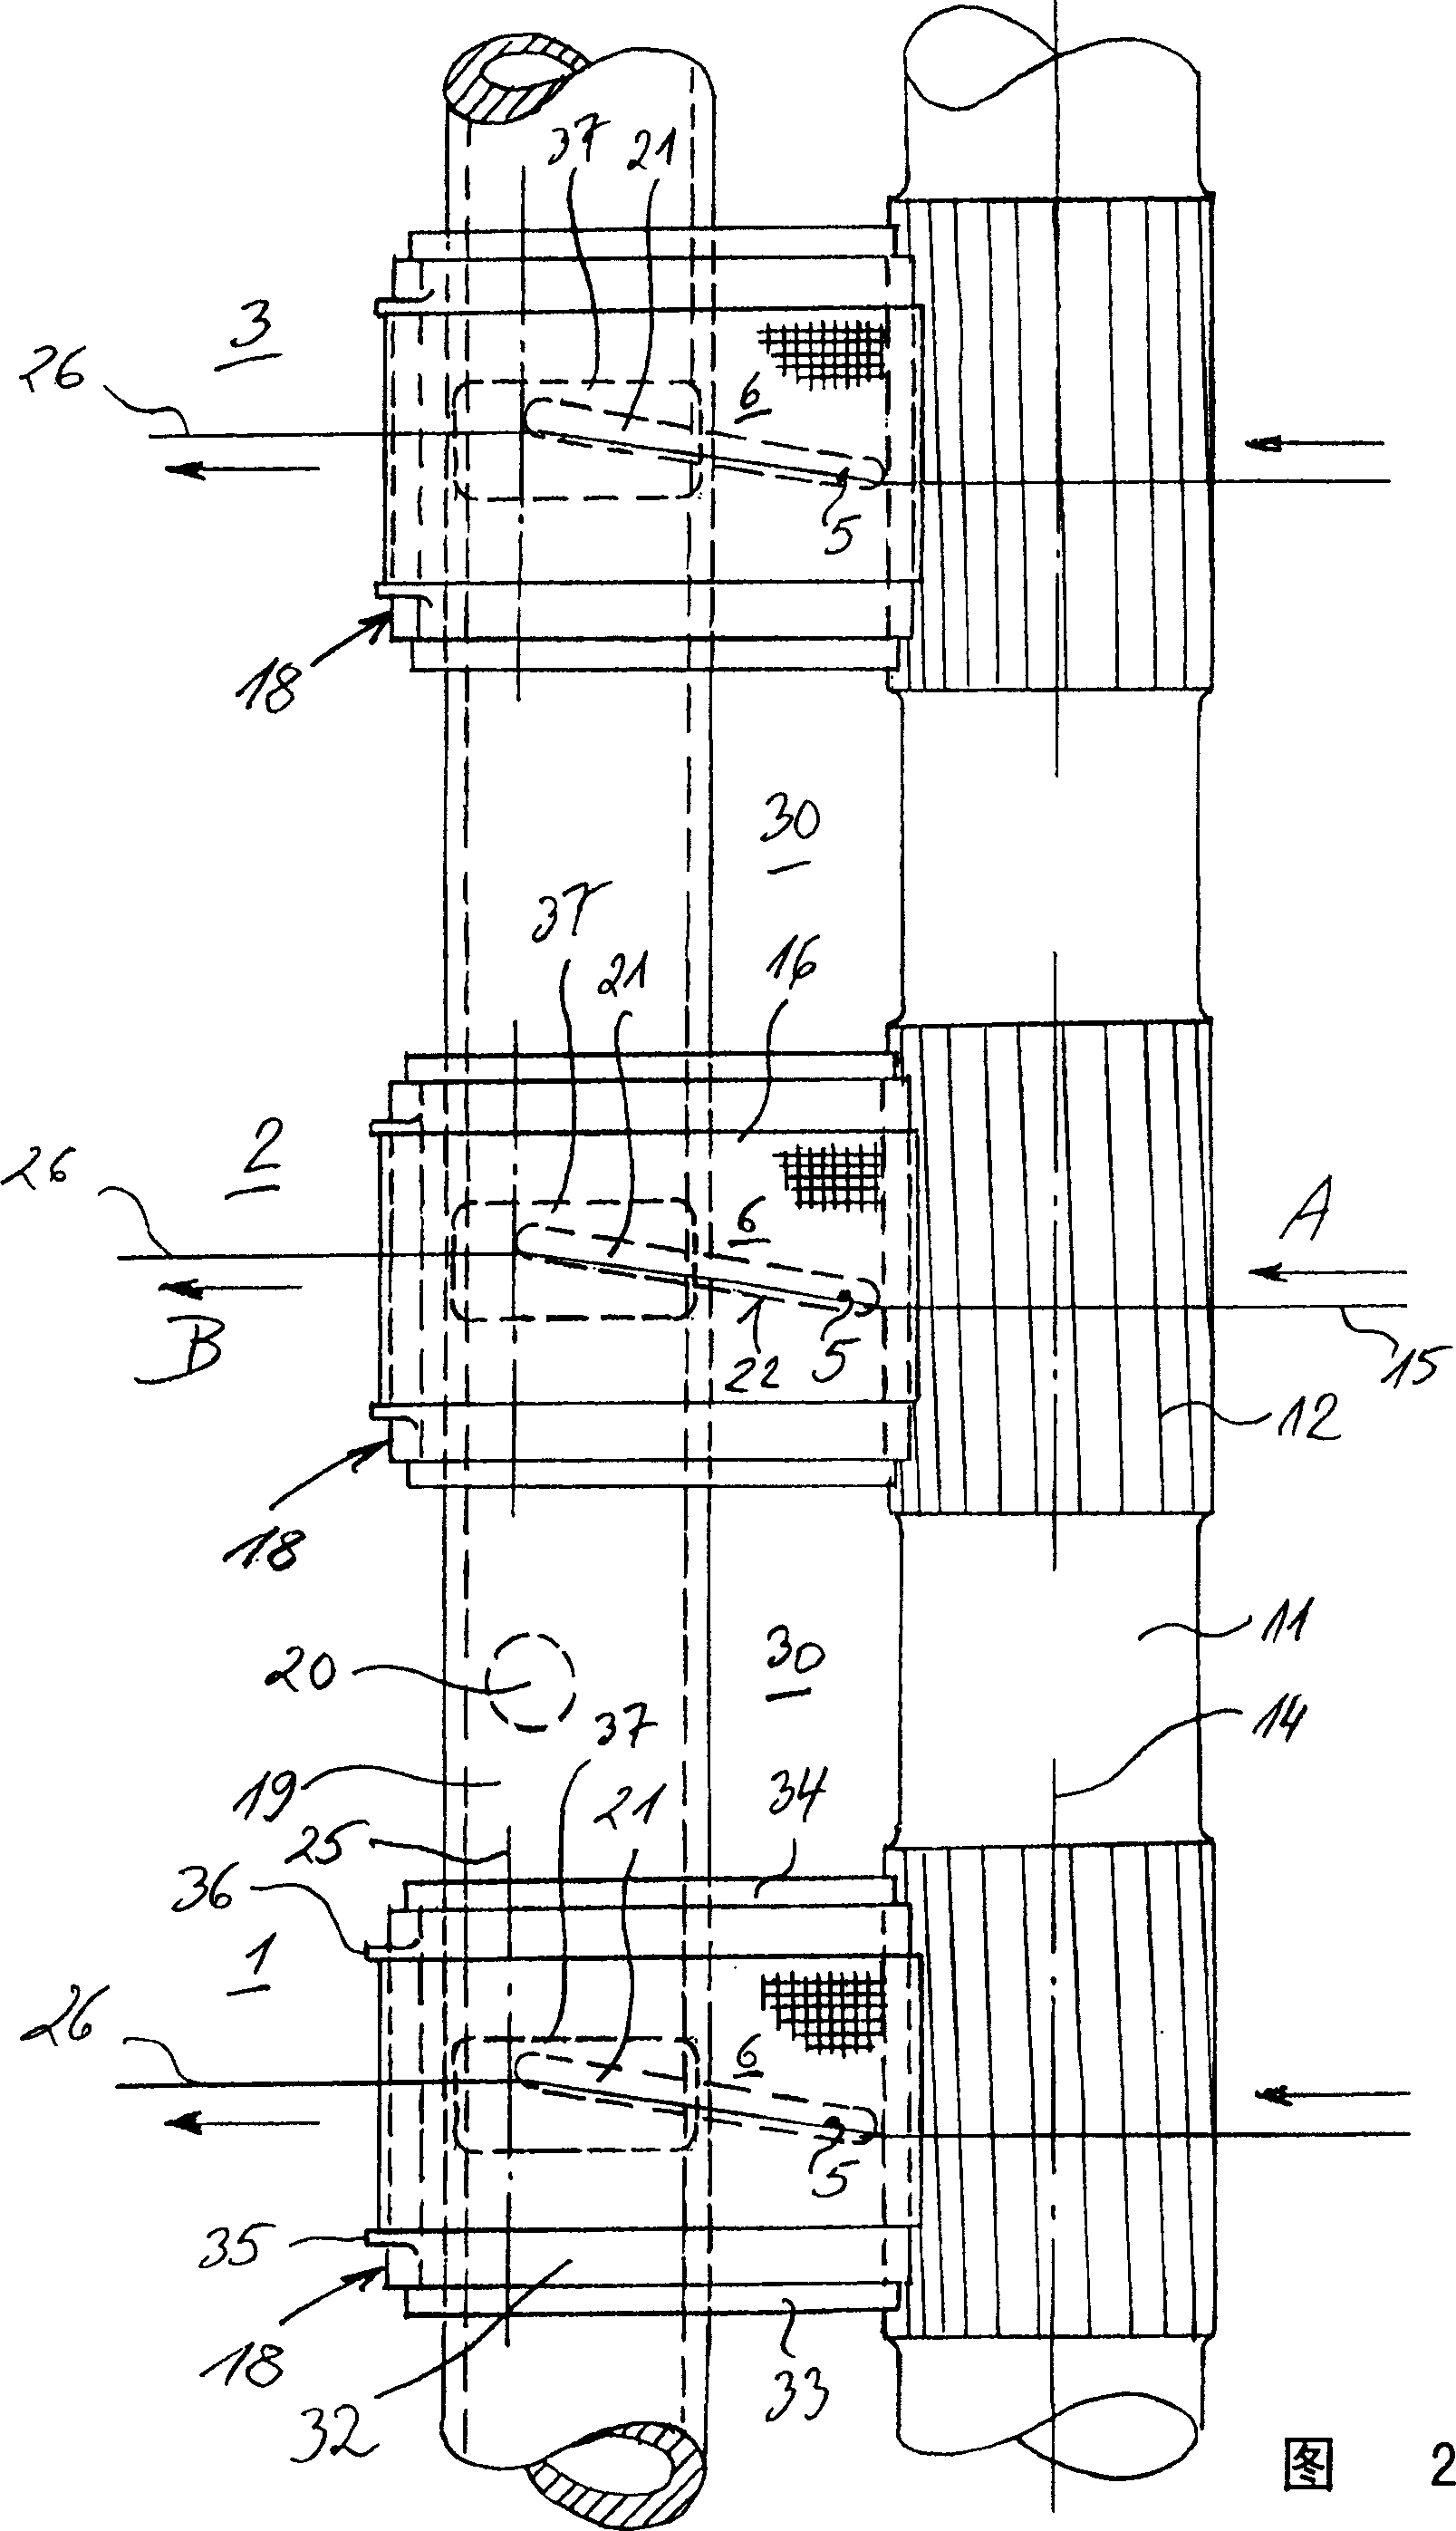 Spinning machine with many adjacently arranged spinning spindle position